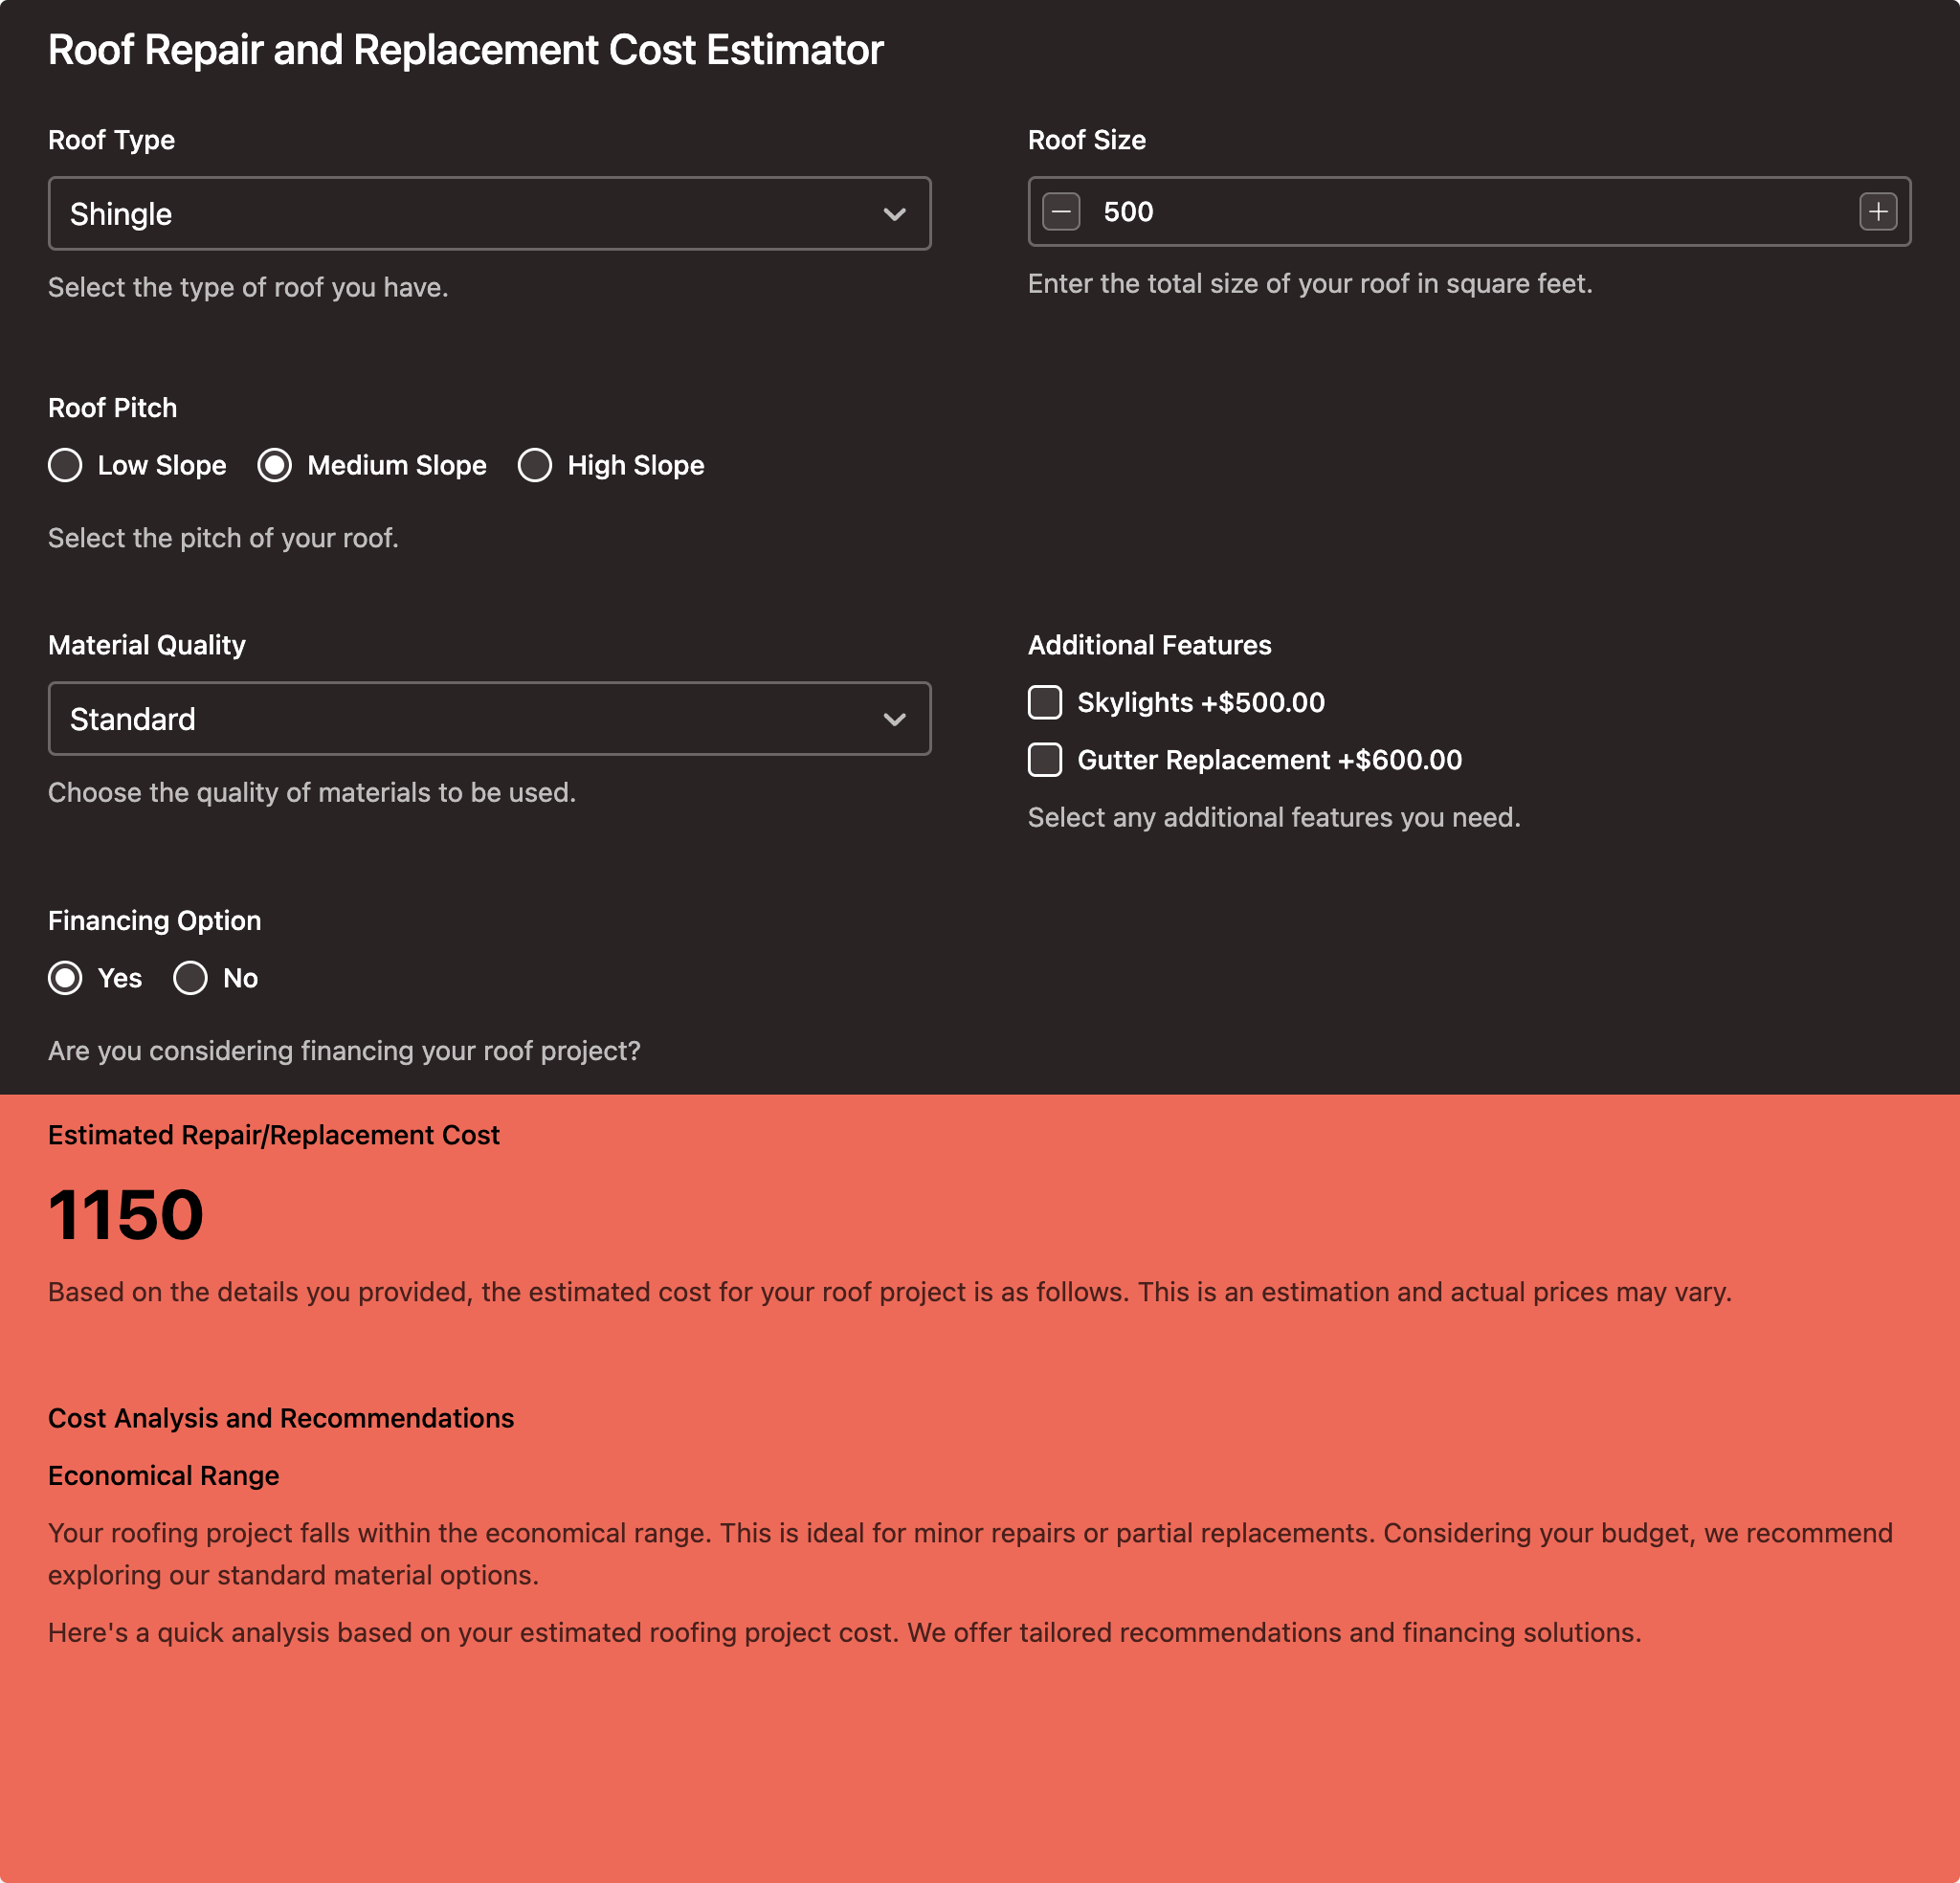 Roof Repair and Replacement Cost Estimator template - Made by ActiveCalculator